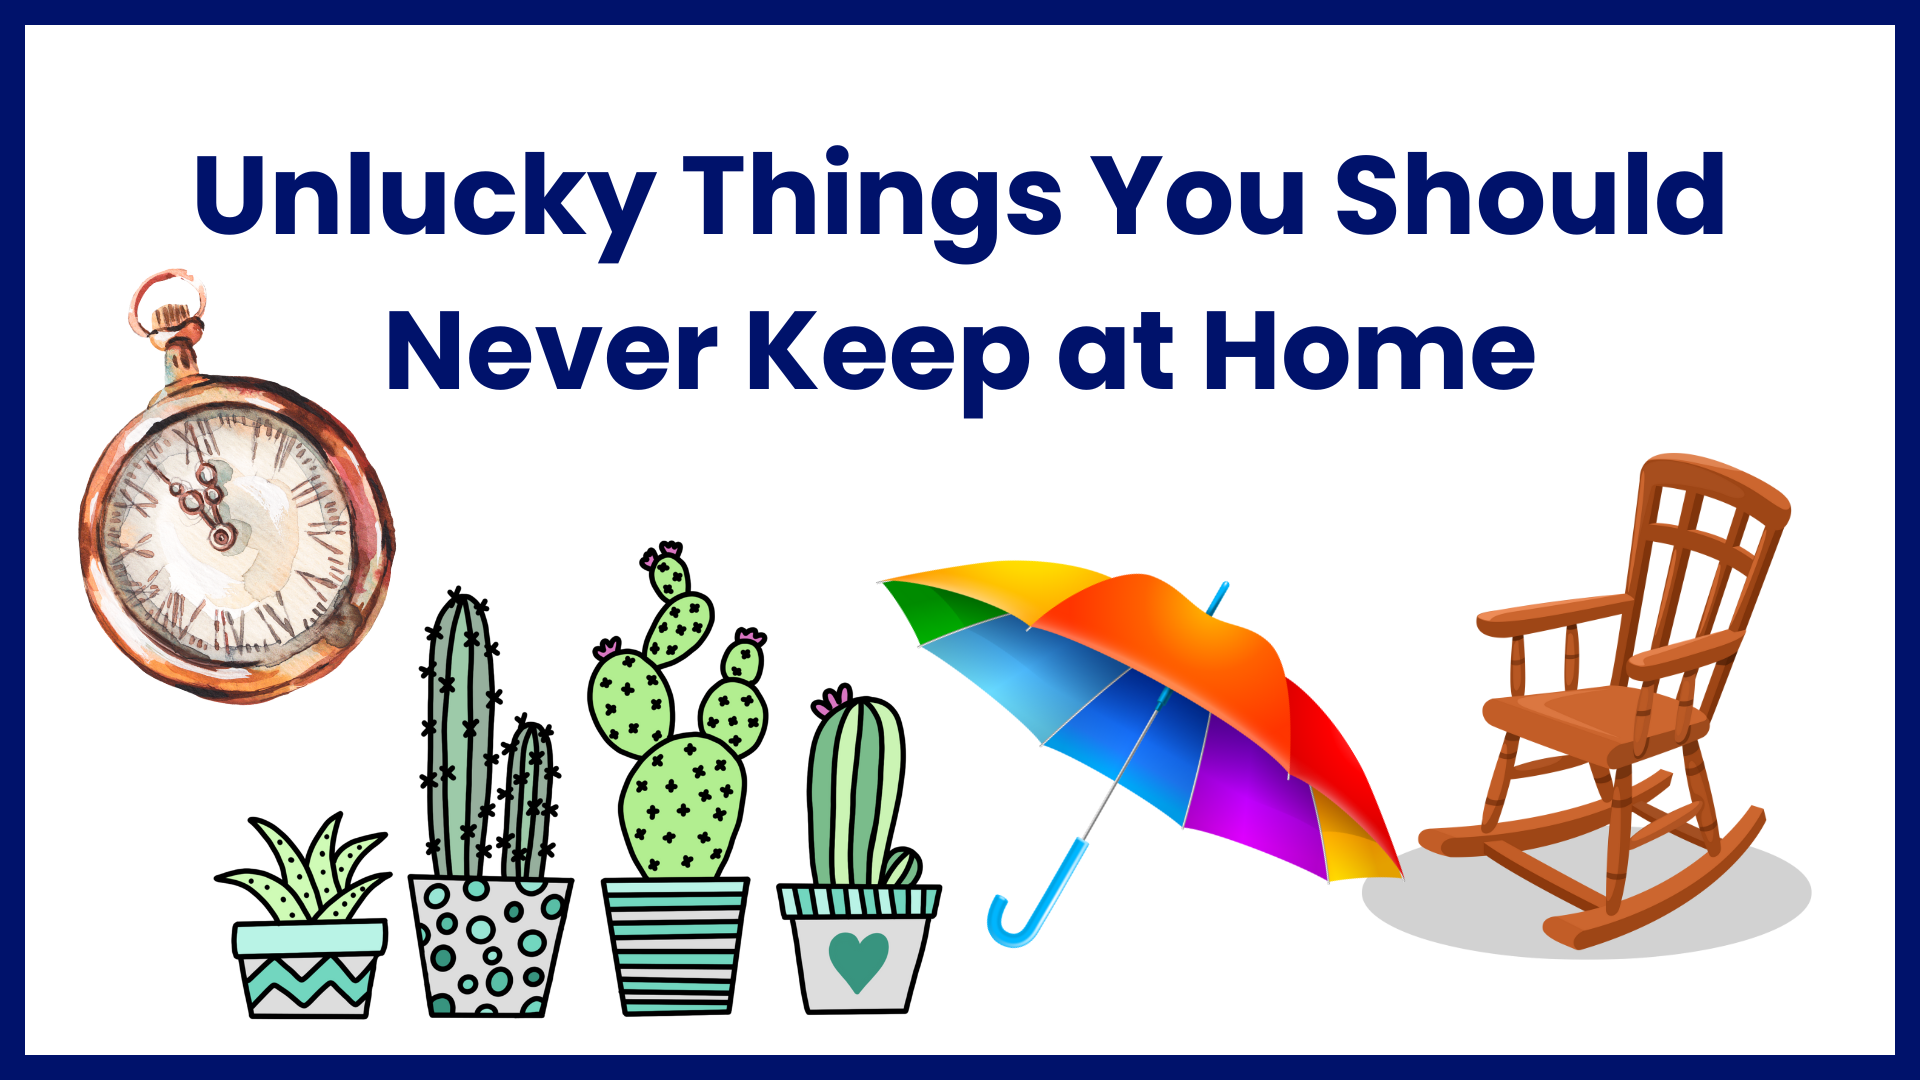 Unlucky Things You Should Never Keep at Home